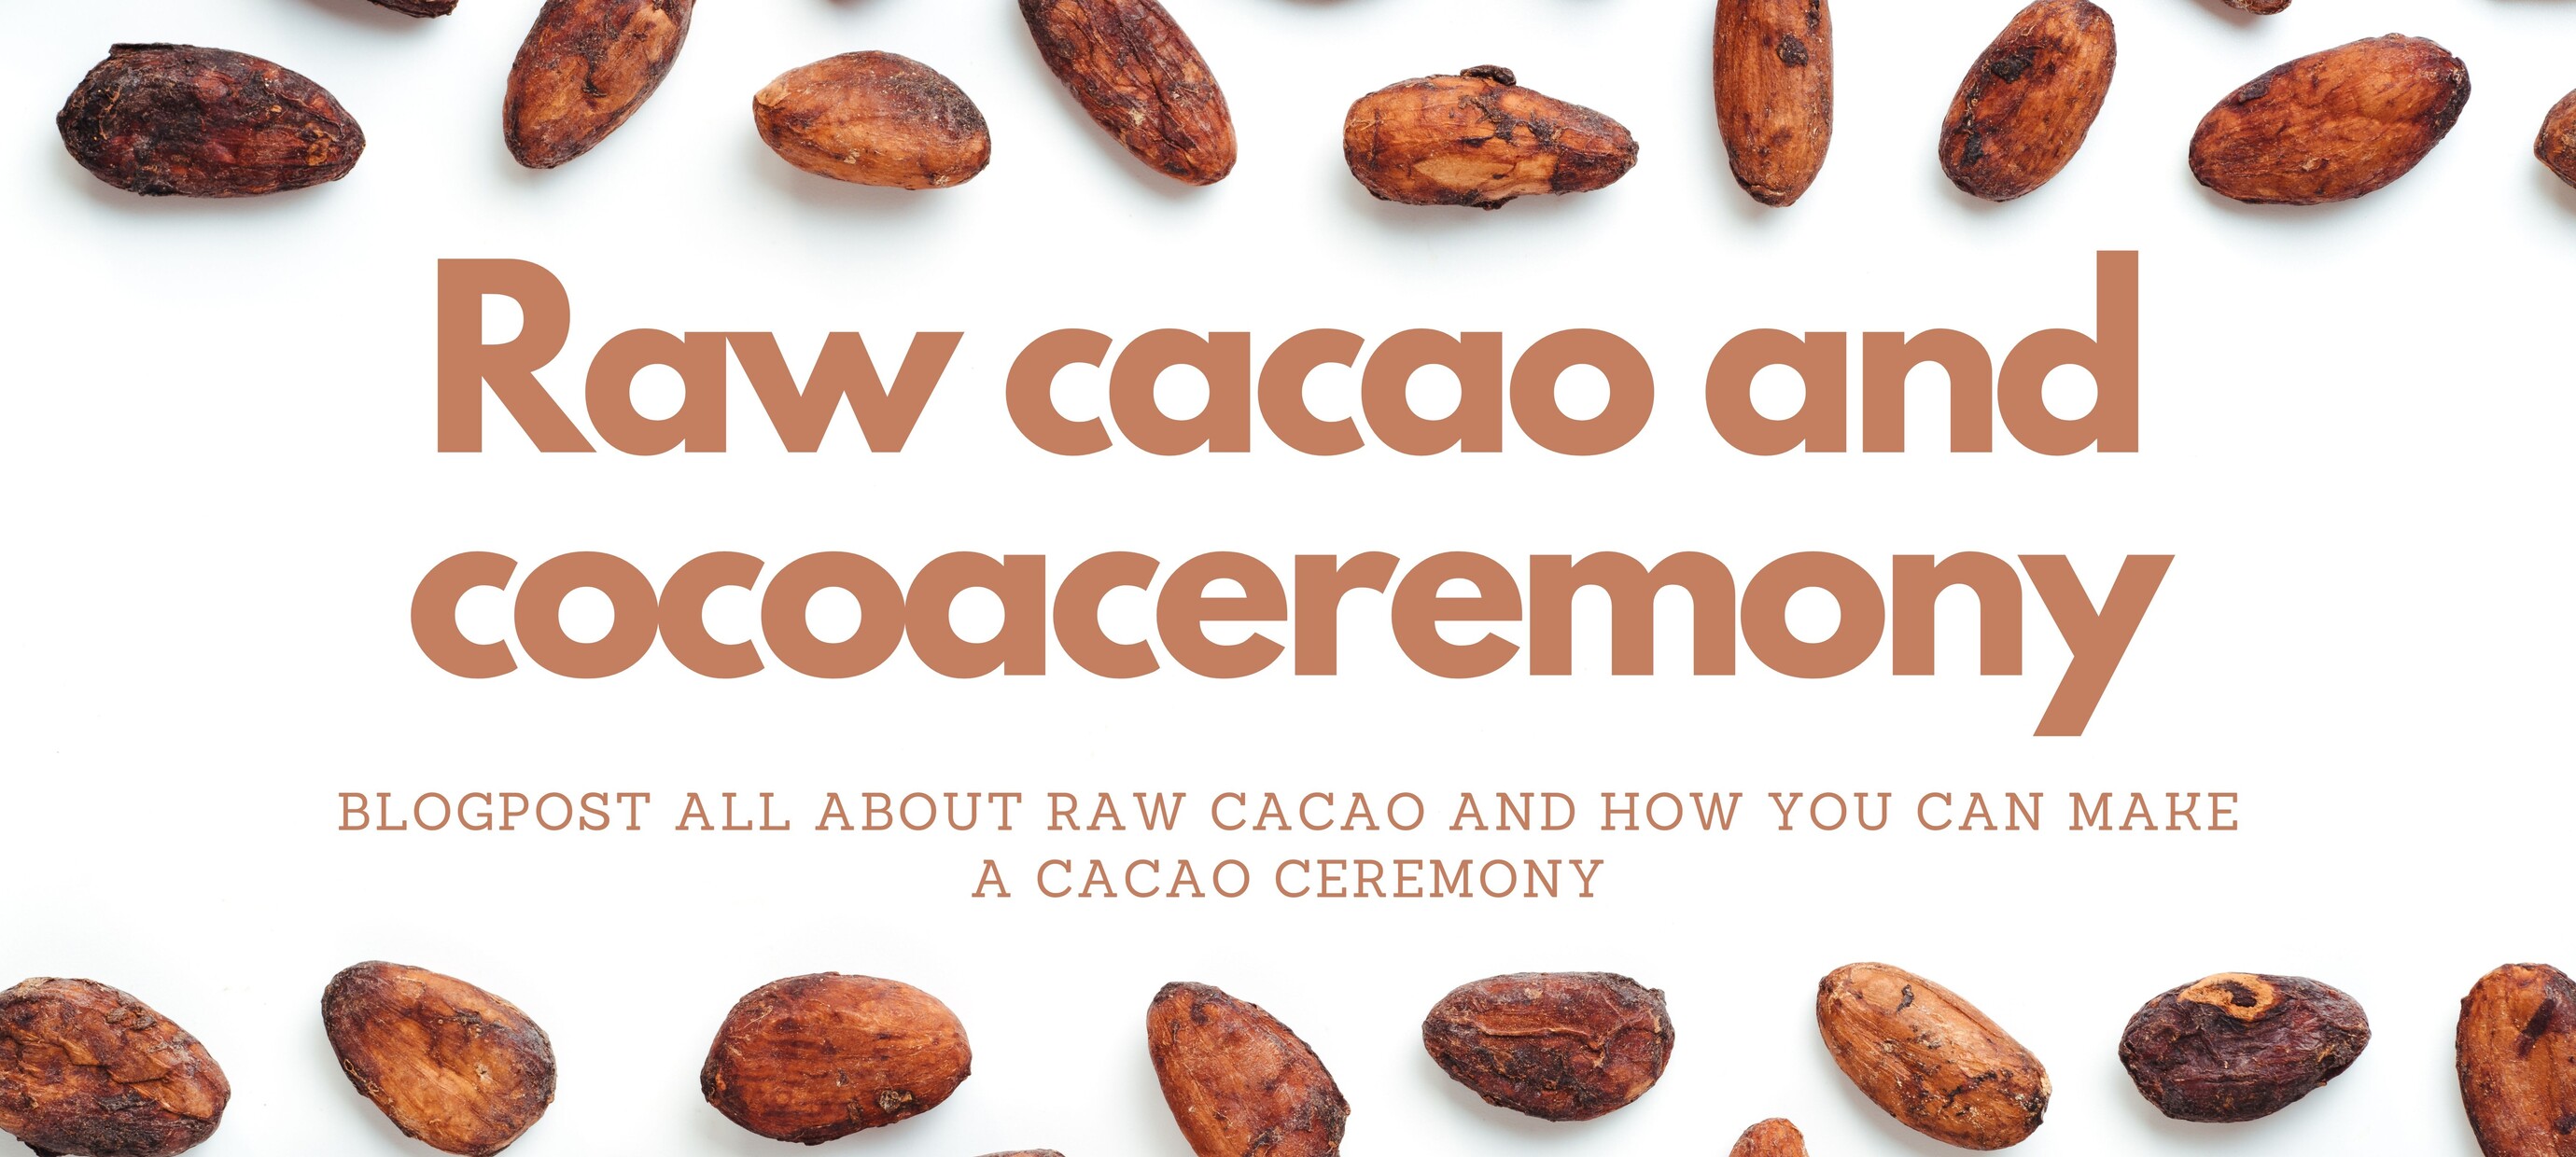 All about Raw Cacao and how you can make a Cacao Ceremony (ENG) 